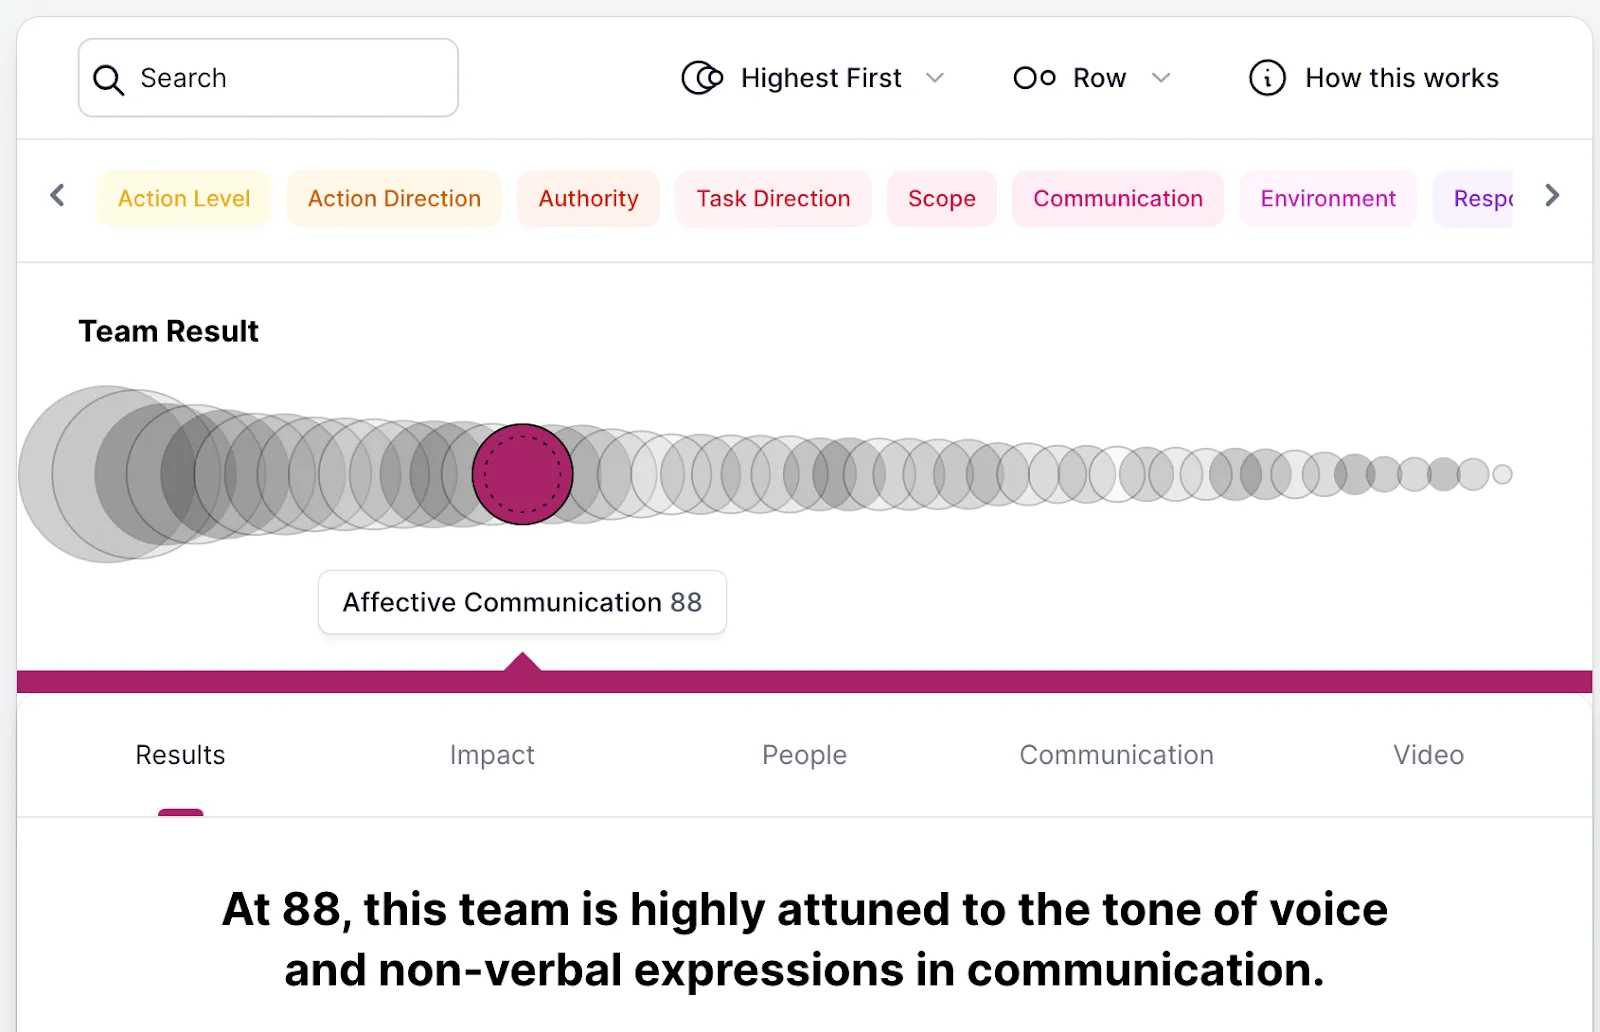 F4S shows your team dynamics such as communication preferences so you can build a positive team culture 